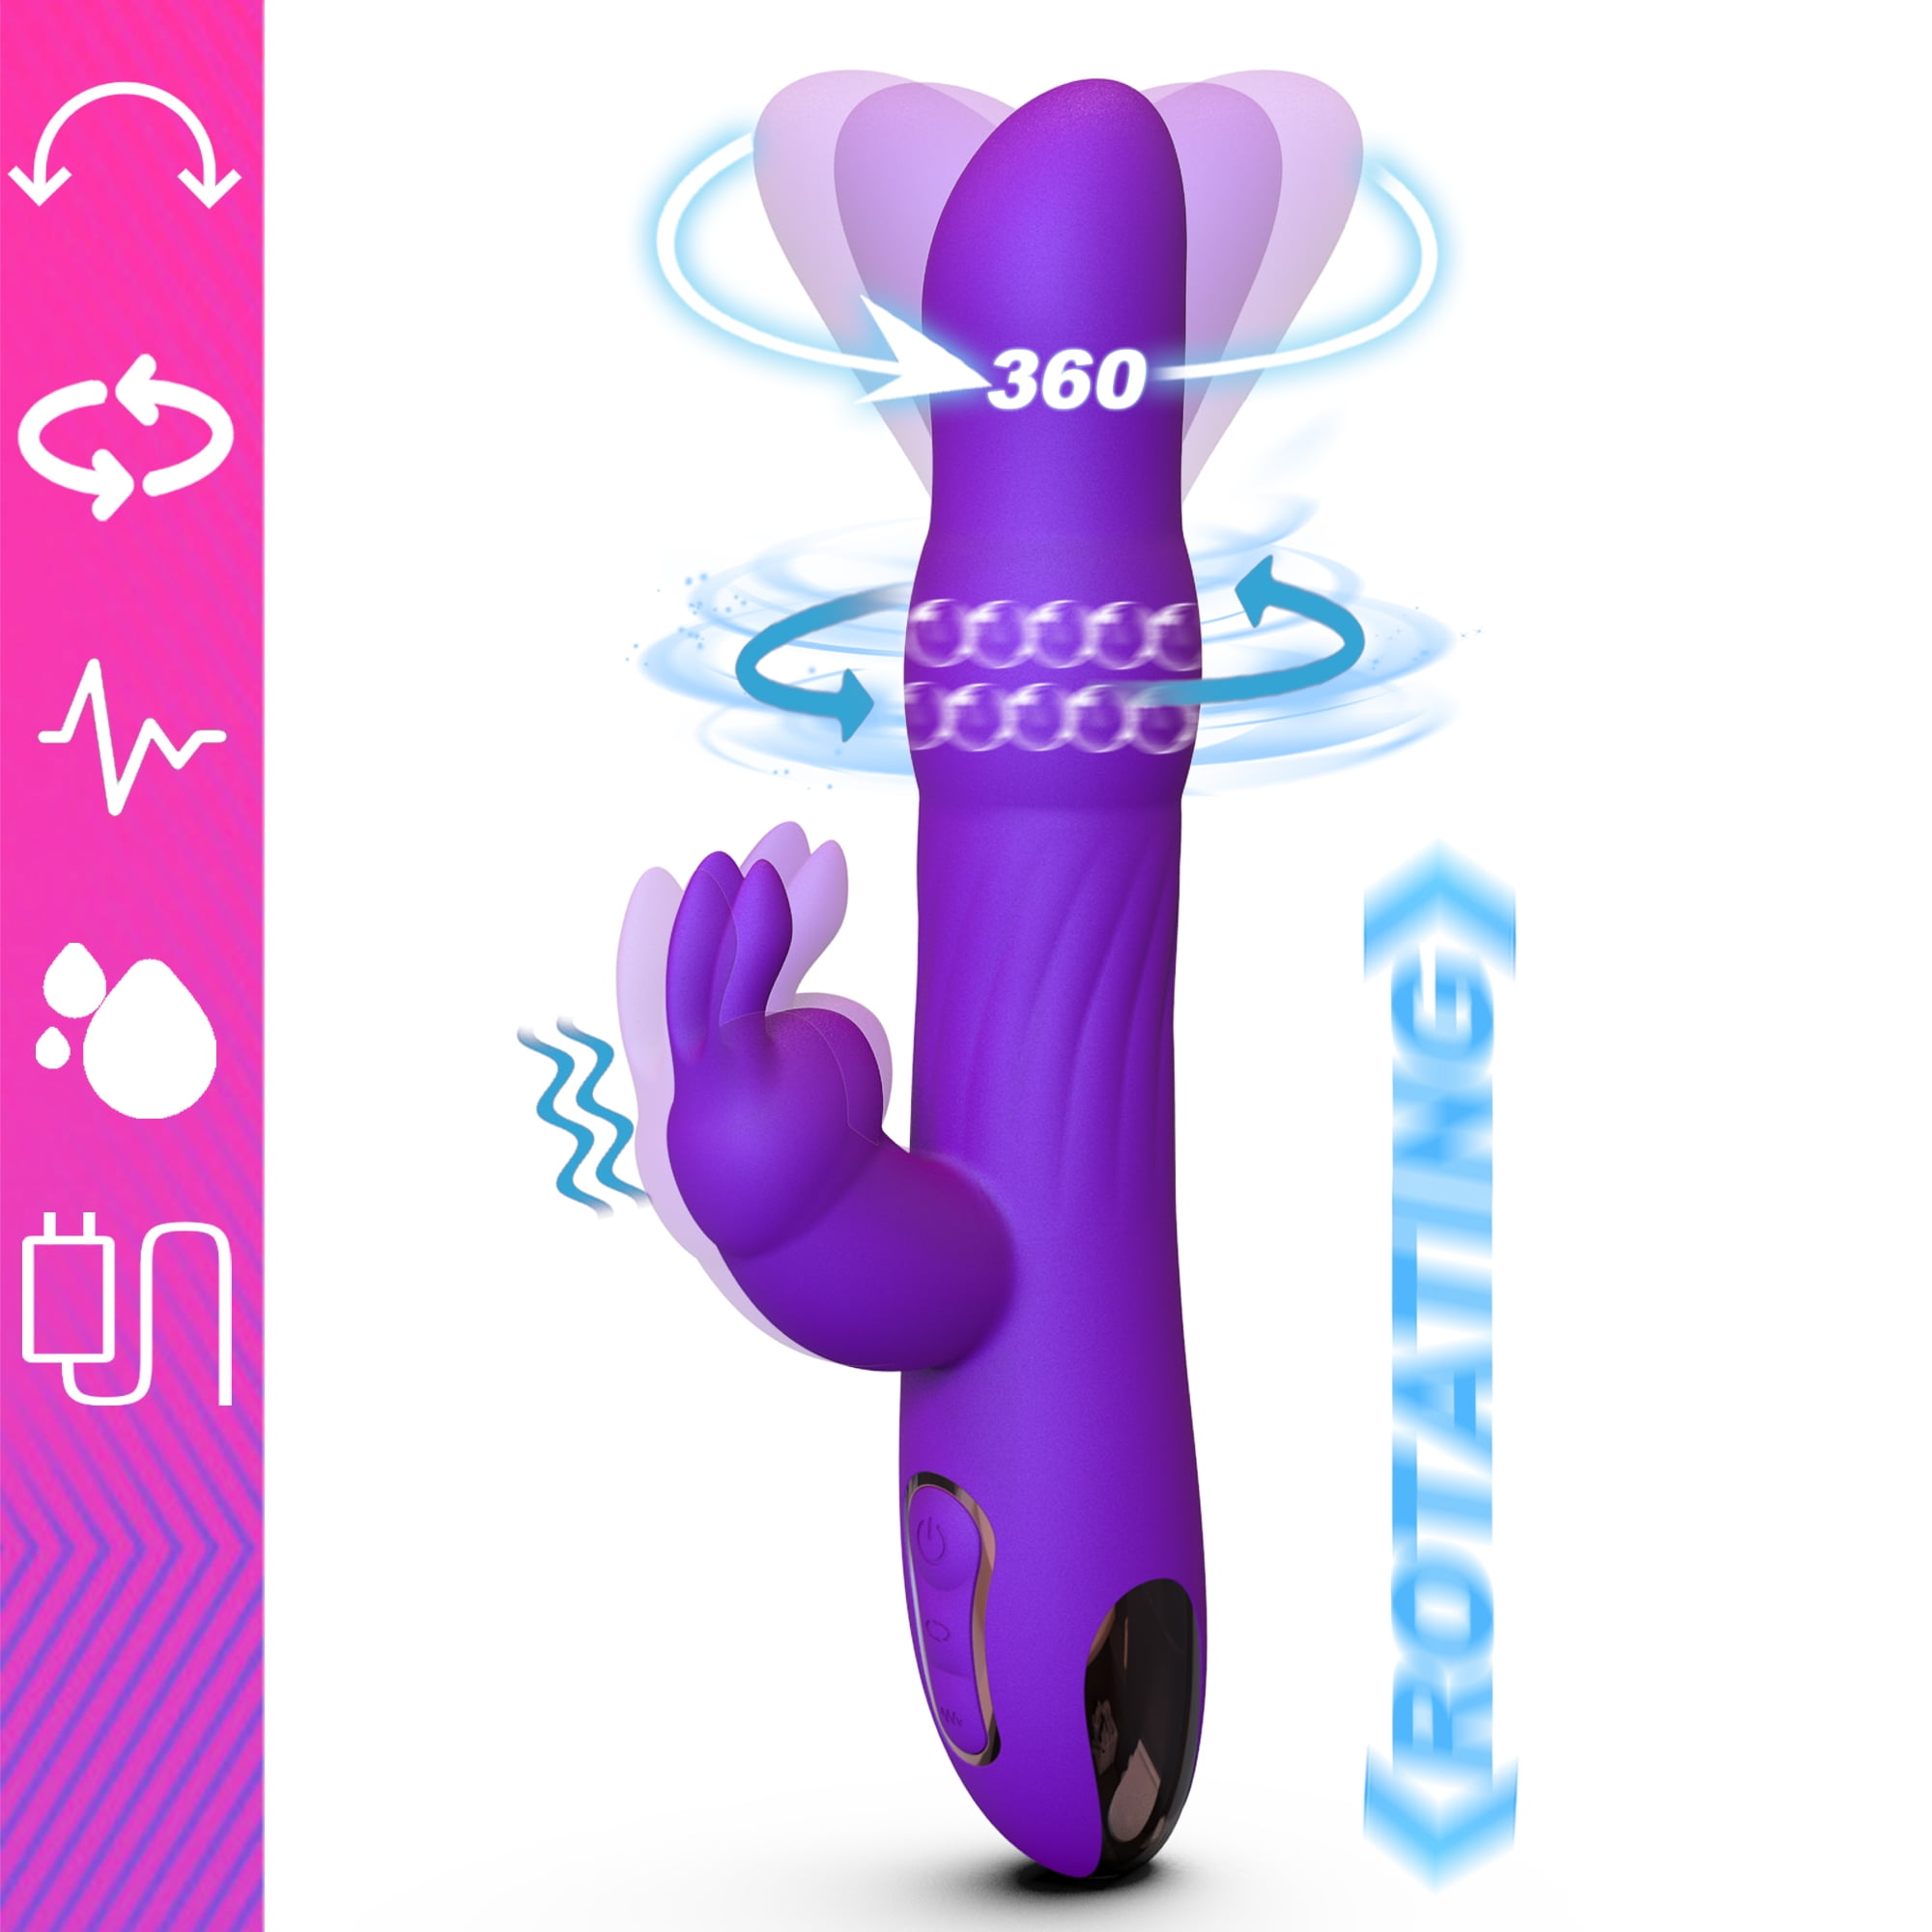 Erifxes Thrusting Rabbit Vibrator Sex Toys for Women, Rotating Swing with Beads, Triple Stimulating Adult Toy, Massager for Couples Pleasure Sexual Games, Clitoral G-spot Stimulation